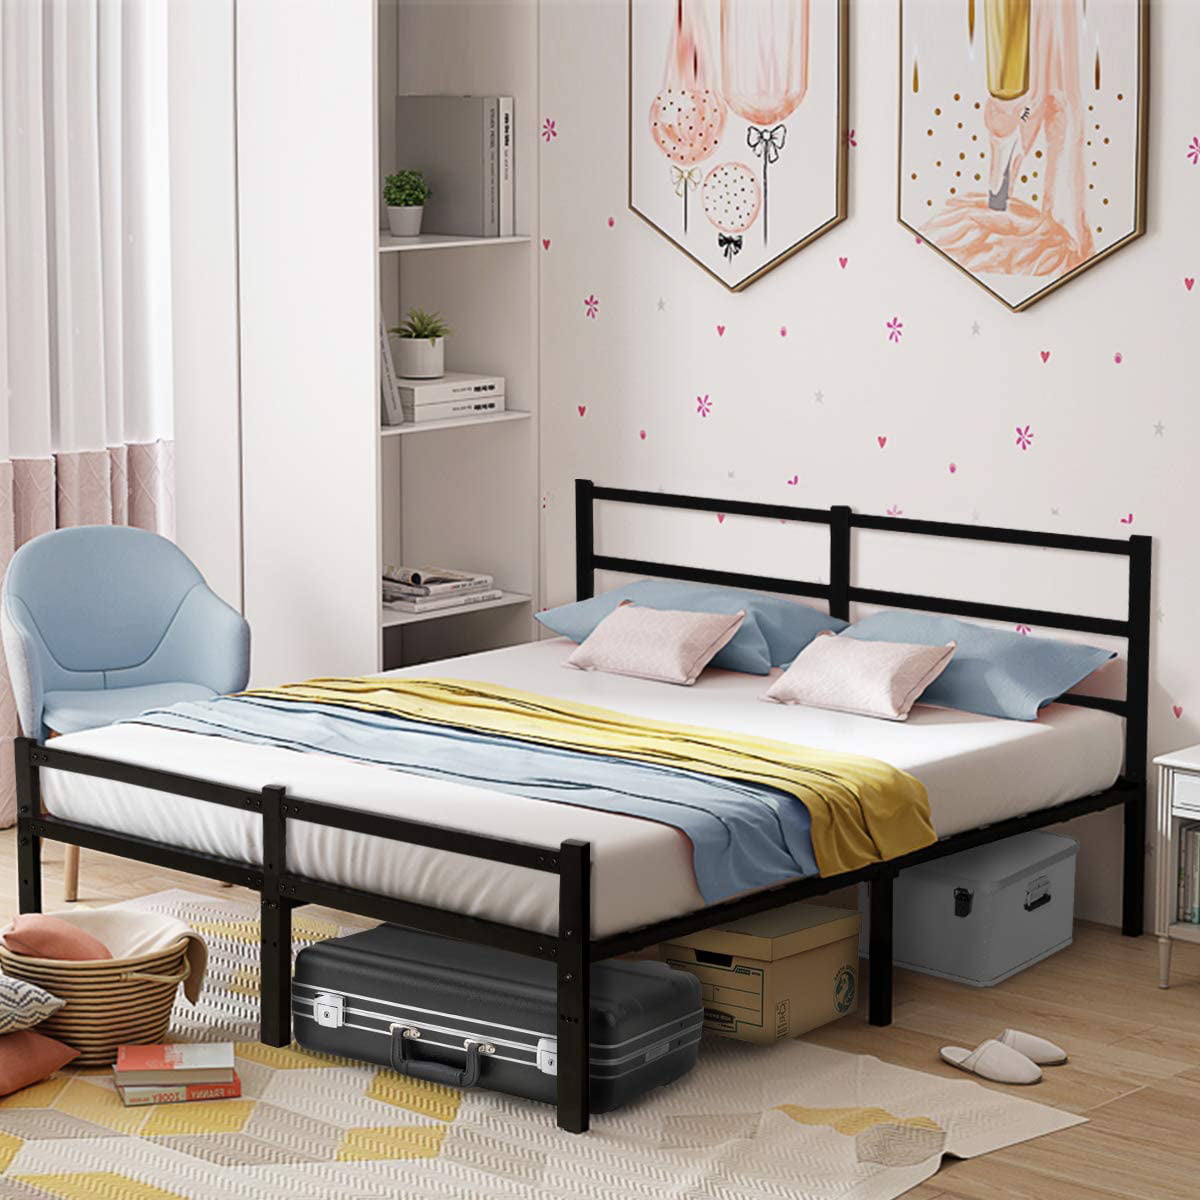 Queen Bed Frames With Headboard Black, Queen Bed Frame With Shelves In Headboard